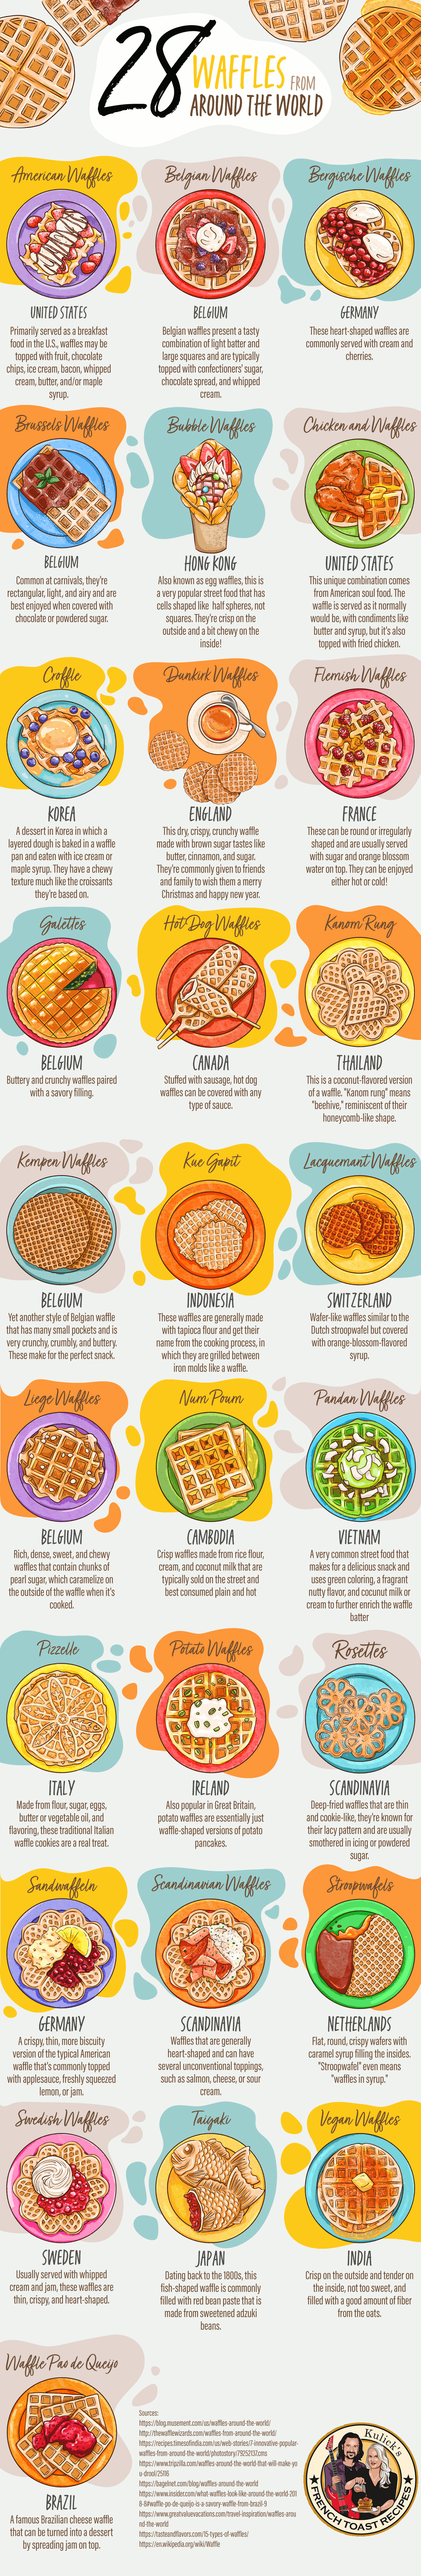 28 Waffles From Around the World